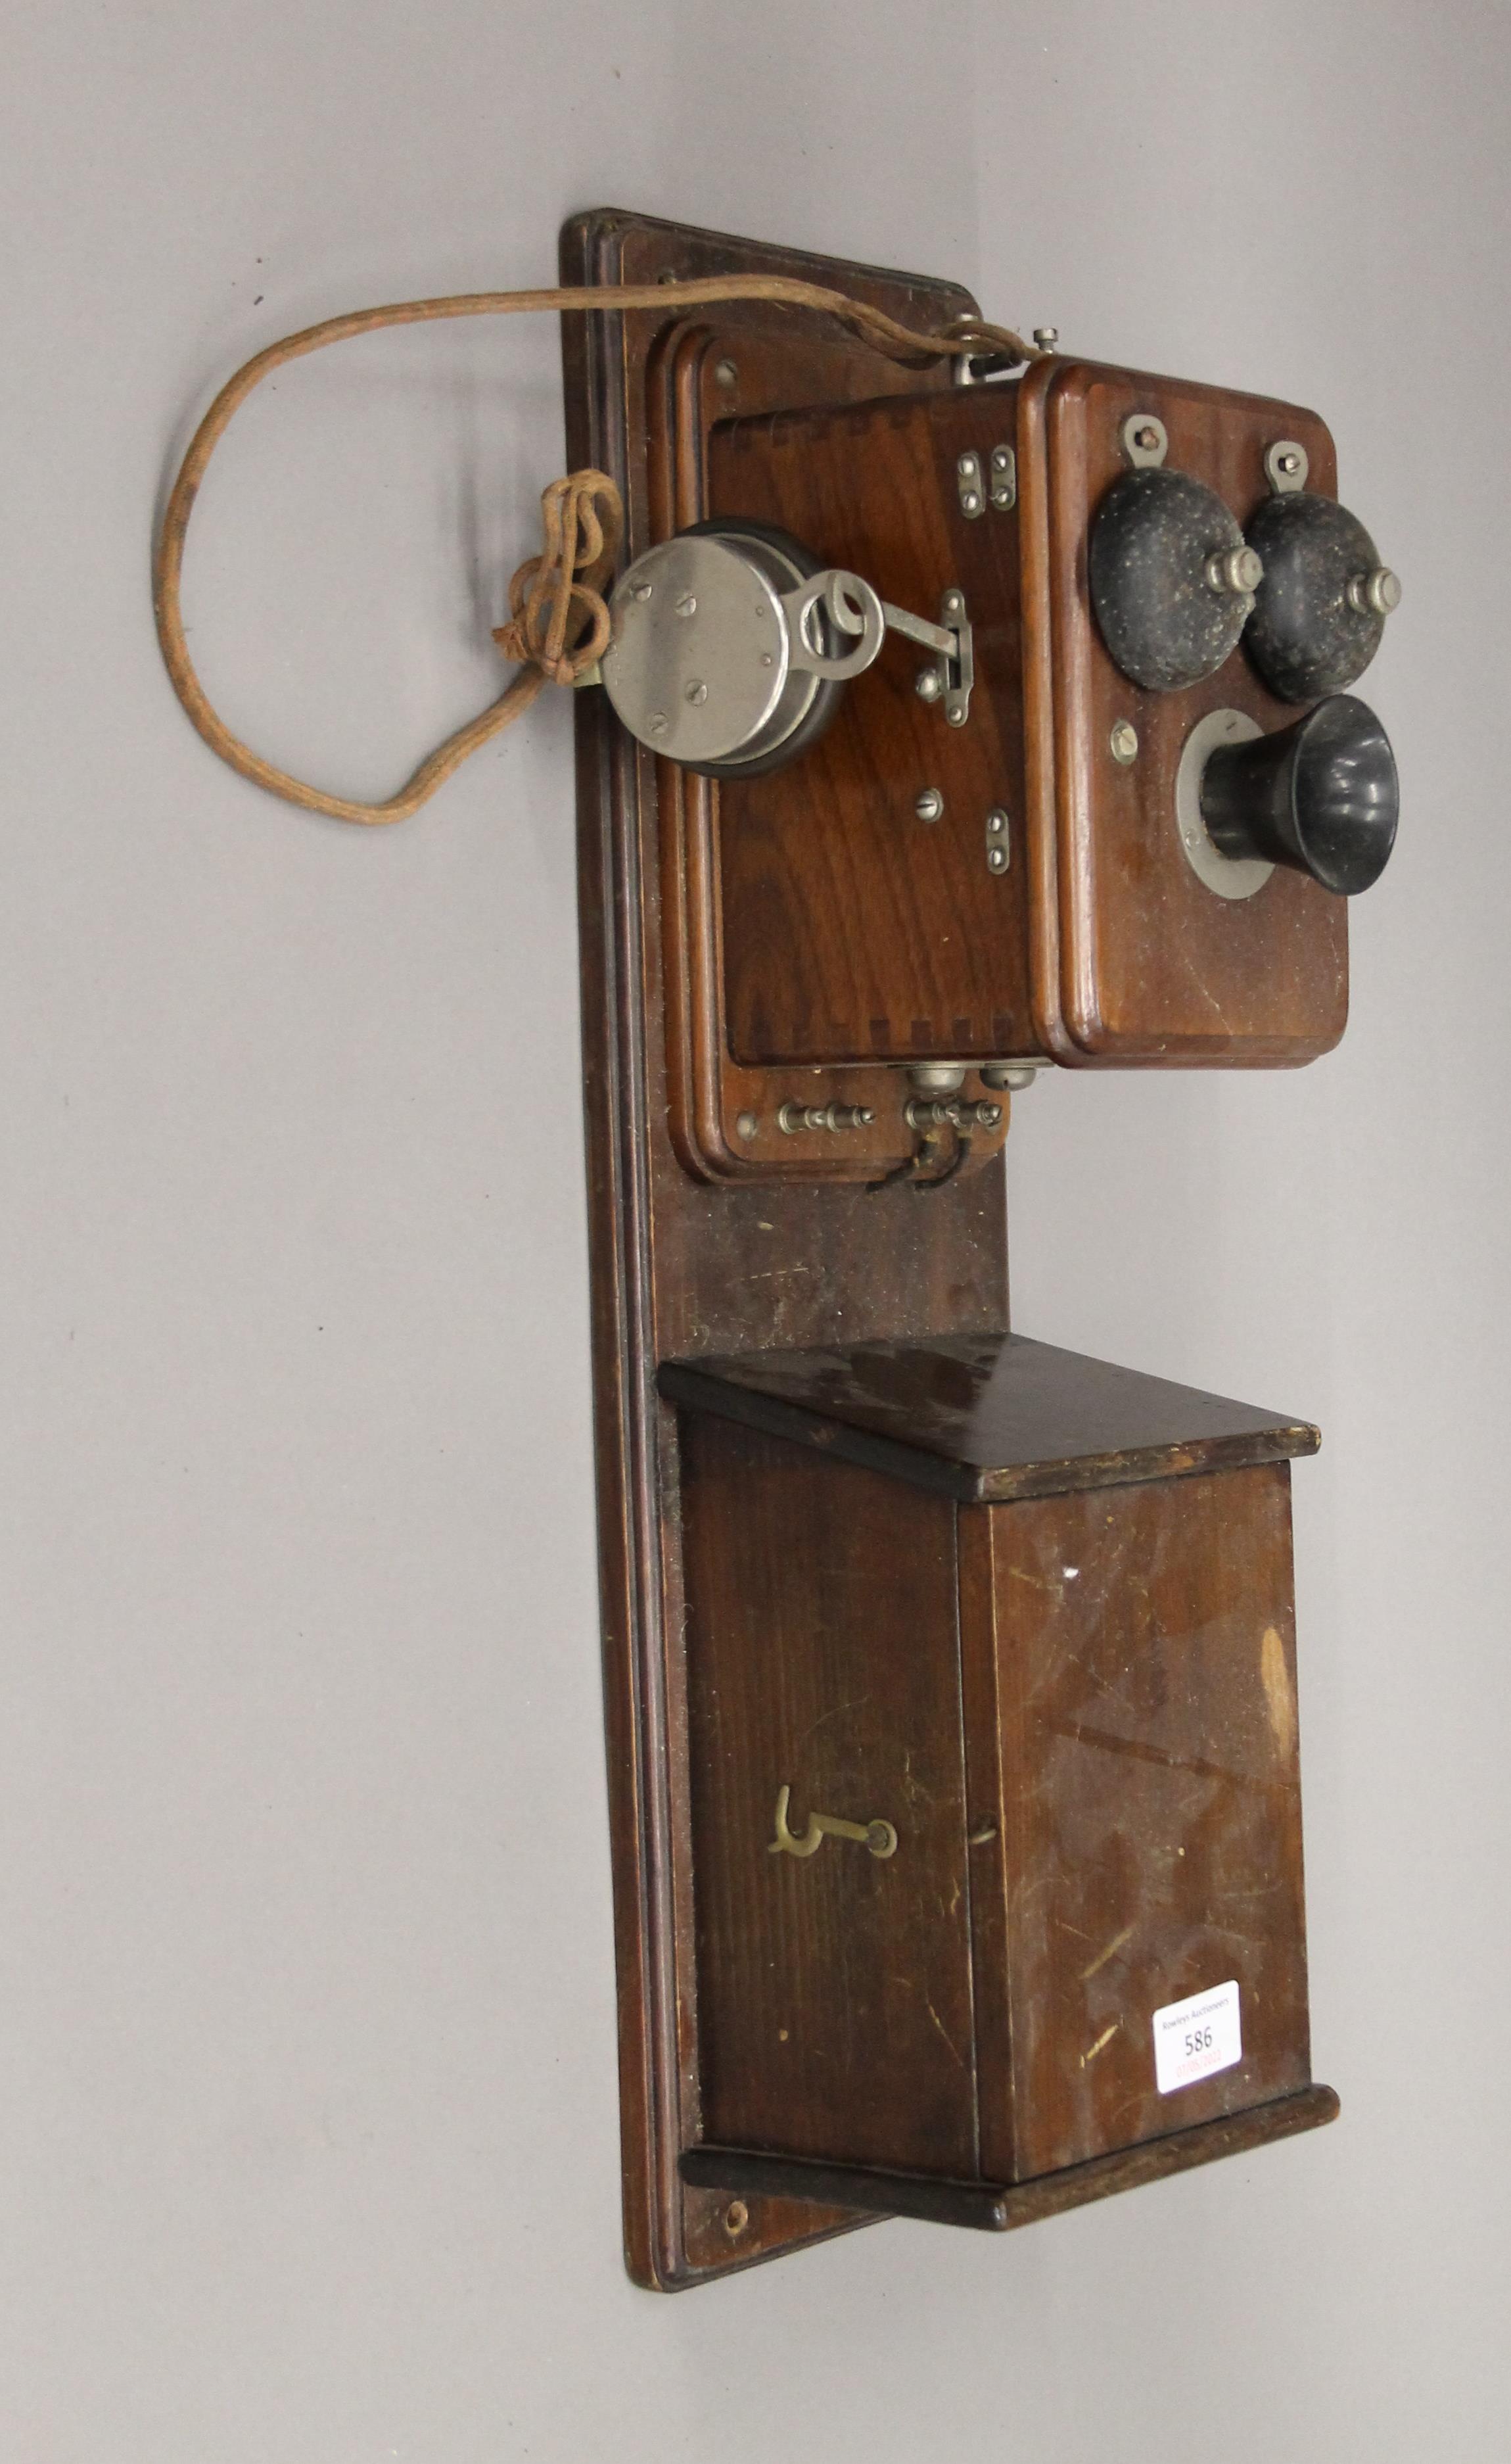 A vintage wooden wall mounted telephone.